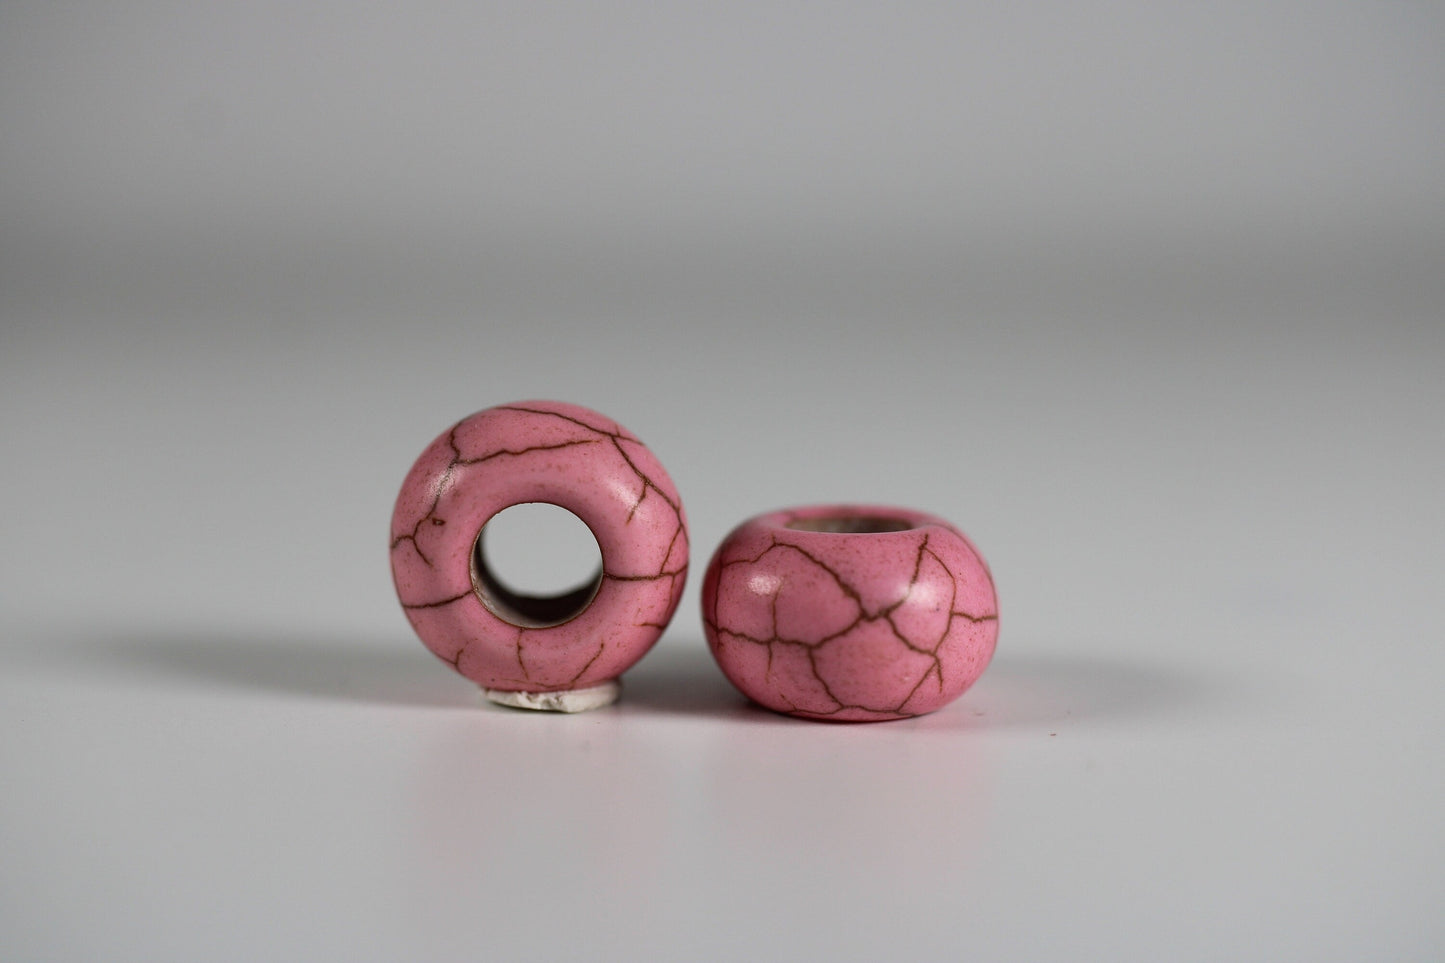 Pink Howlite Dread Beads // 6mm Bead Hole - 2 pack // Rainbow Dread Bead, Stone dread beads, Dread Jewelry,  Dread Accessories,